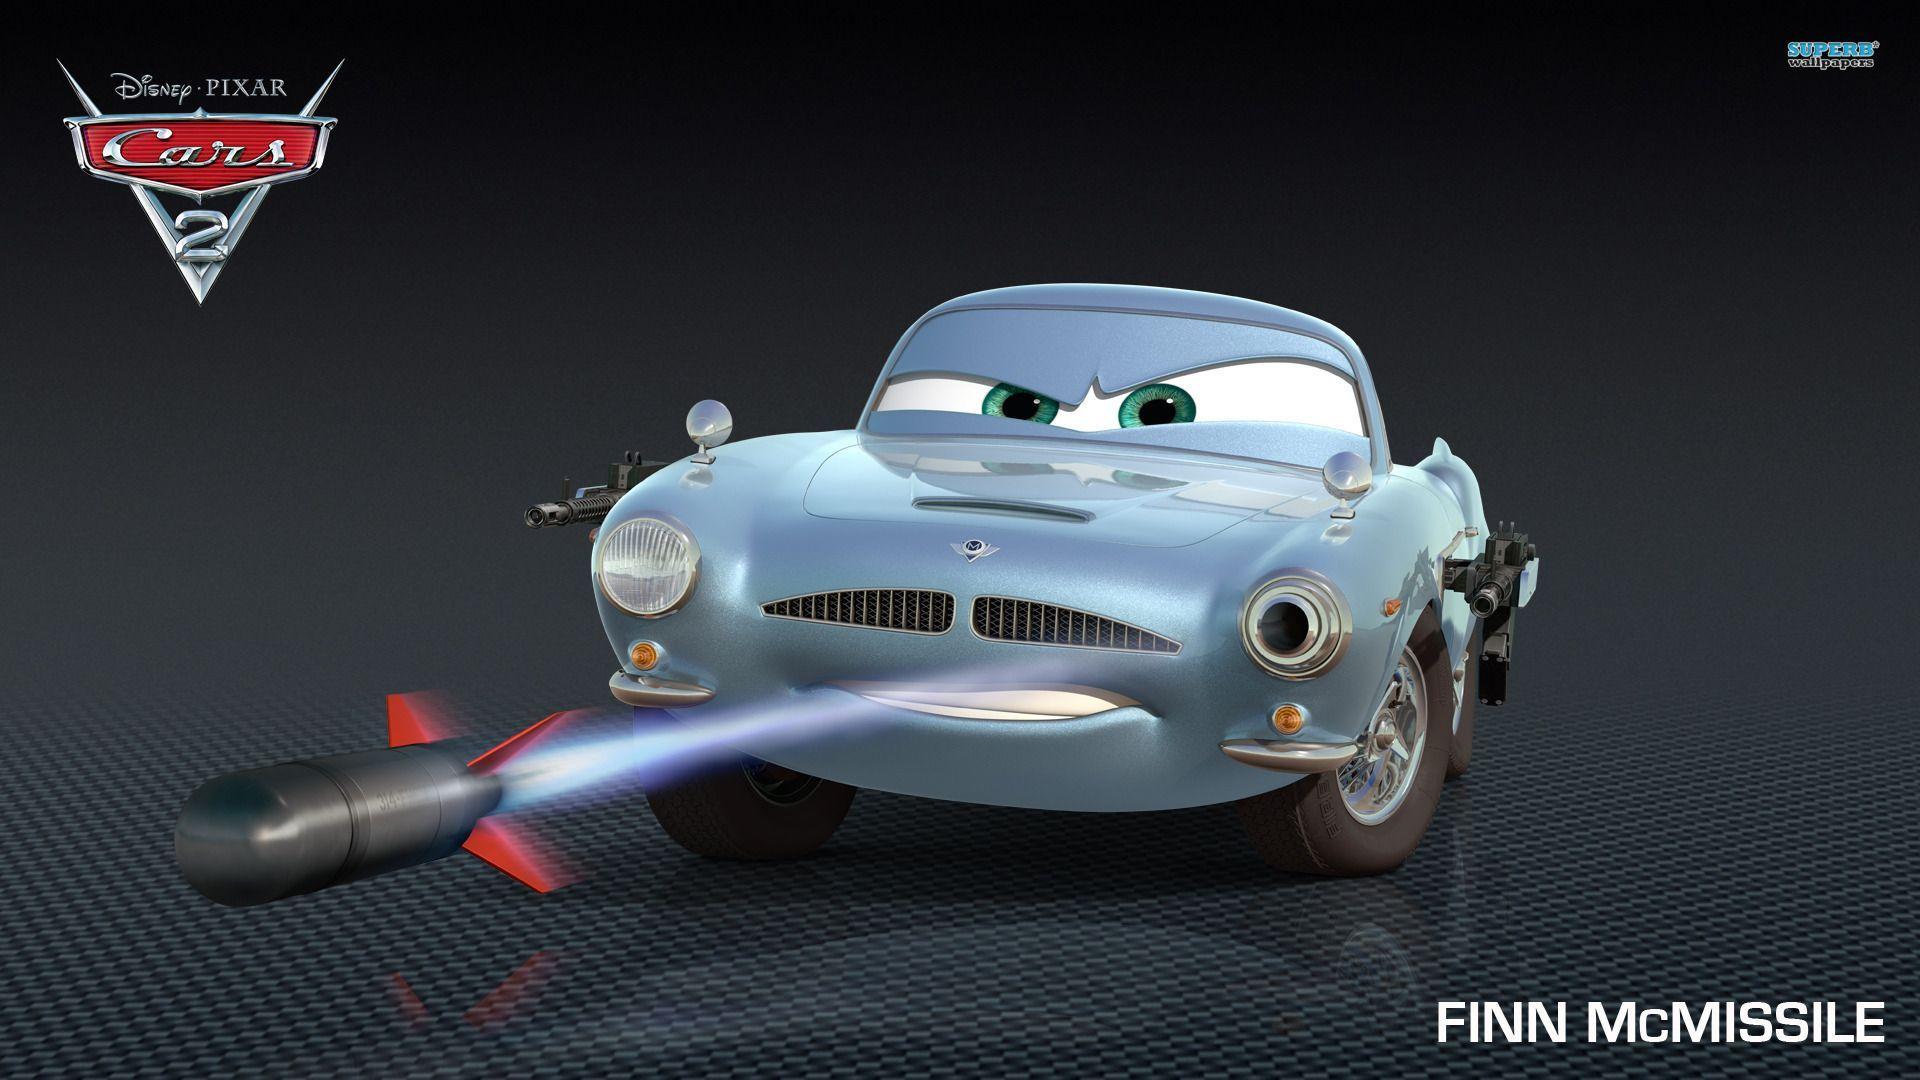 cars 2 movie hd download torrent